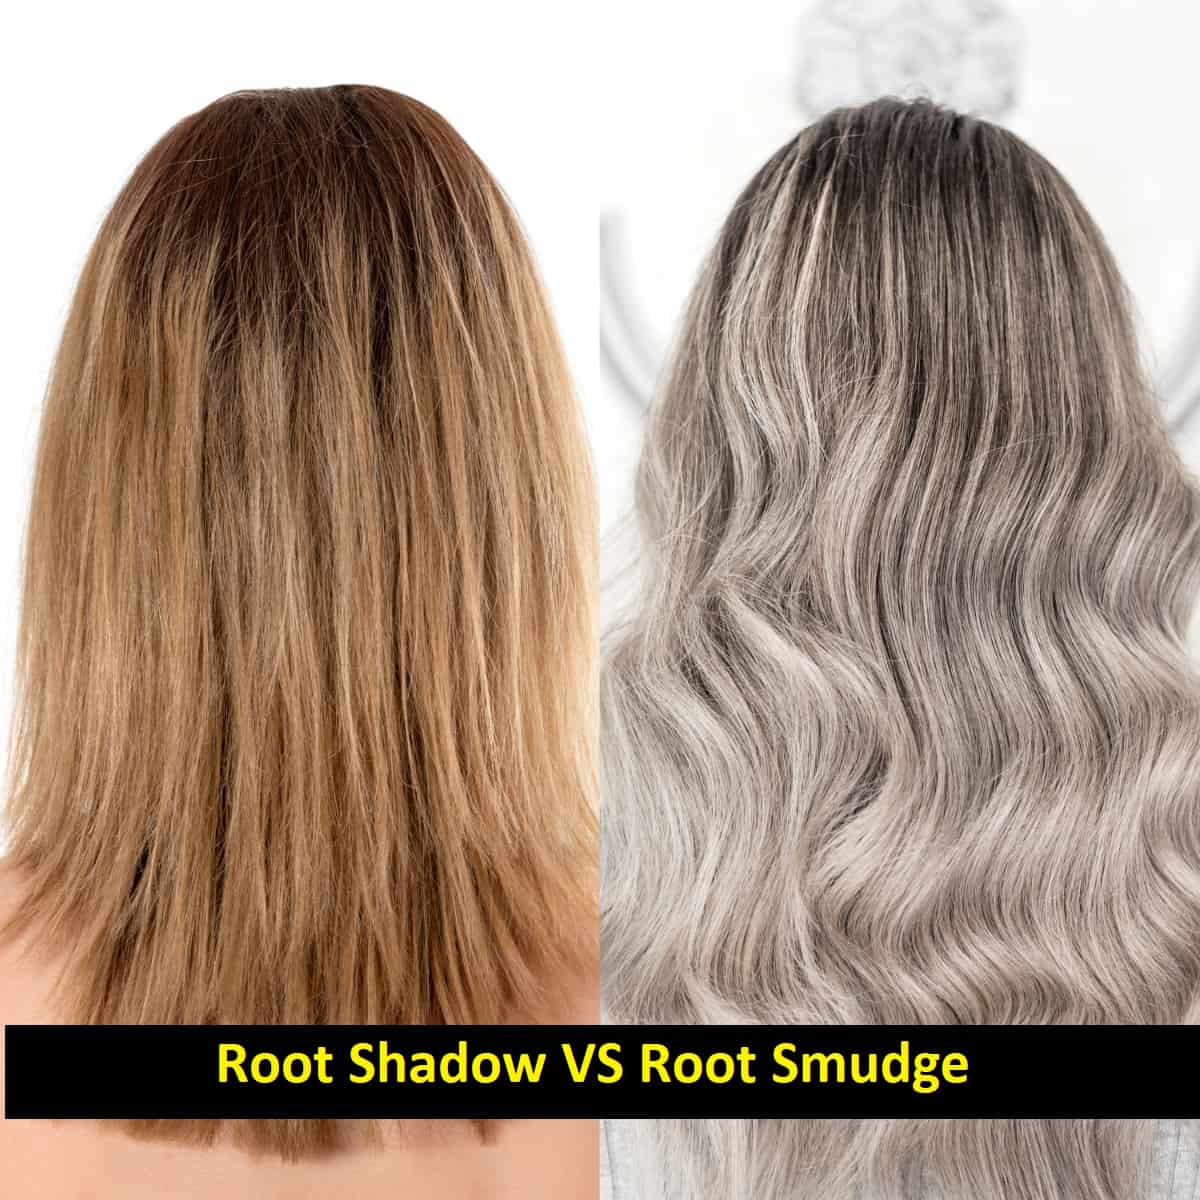 Root Smudge VS Root Shadow